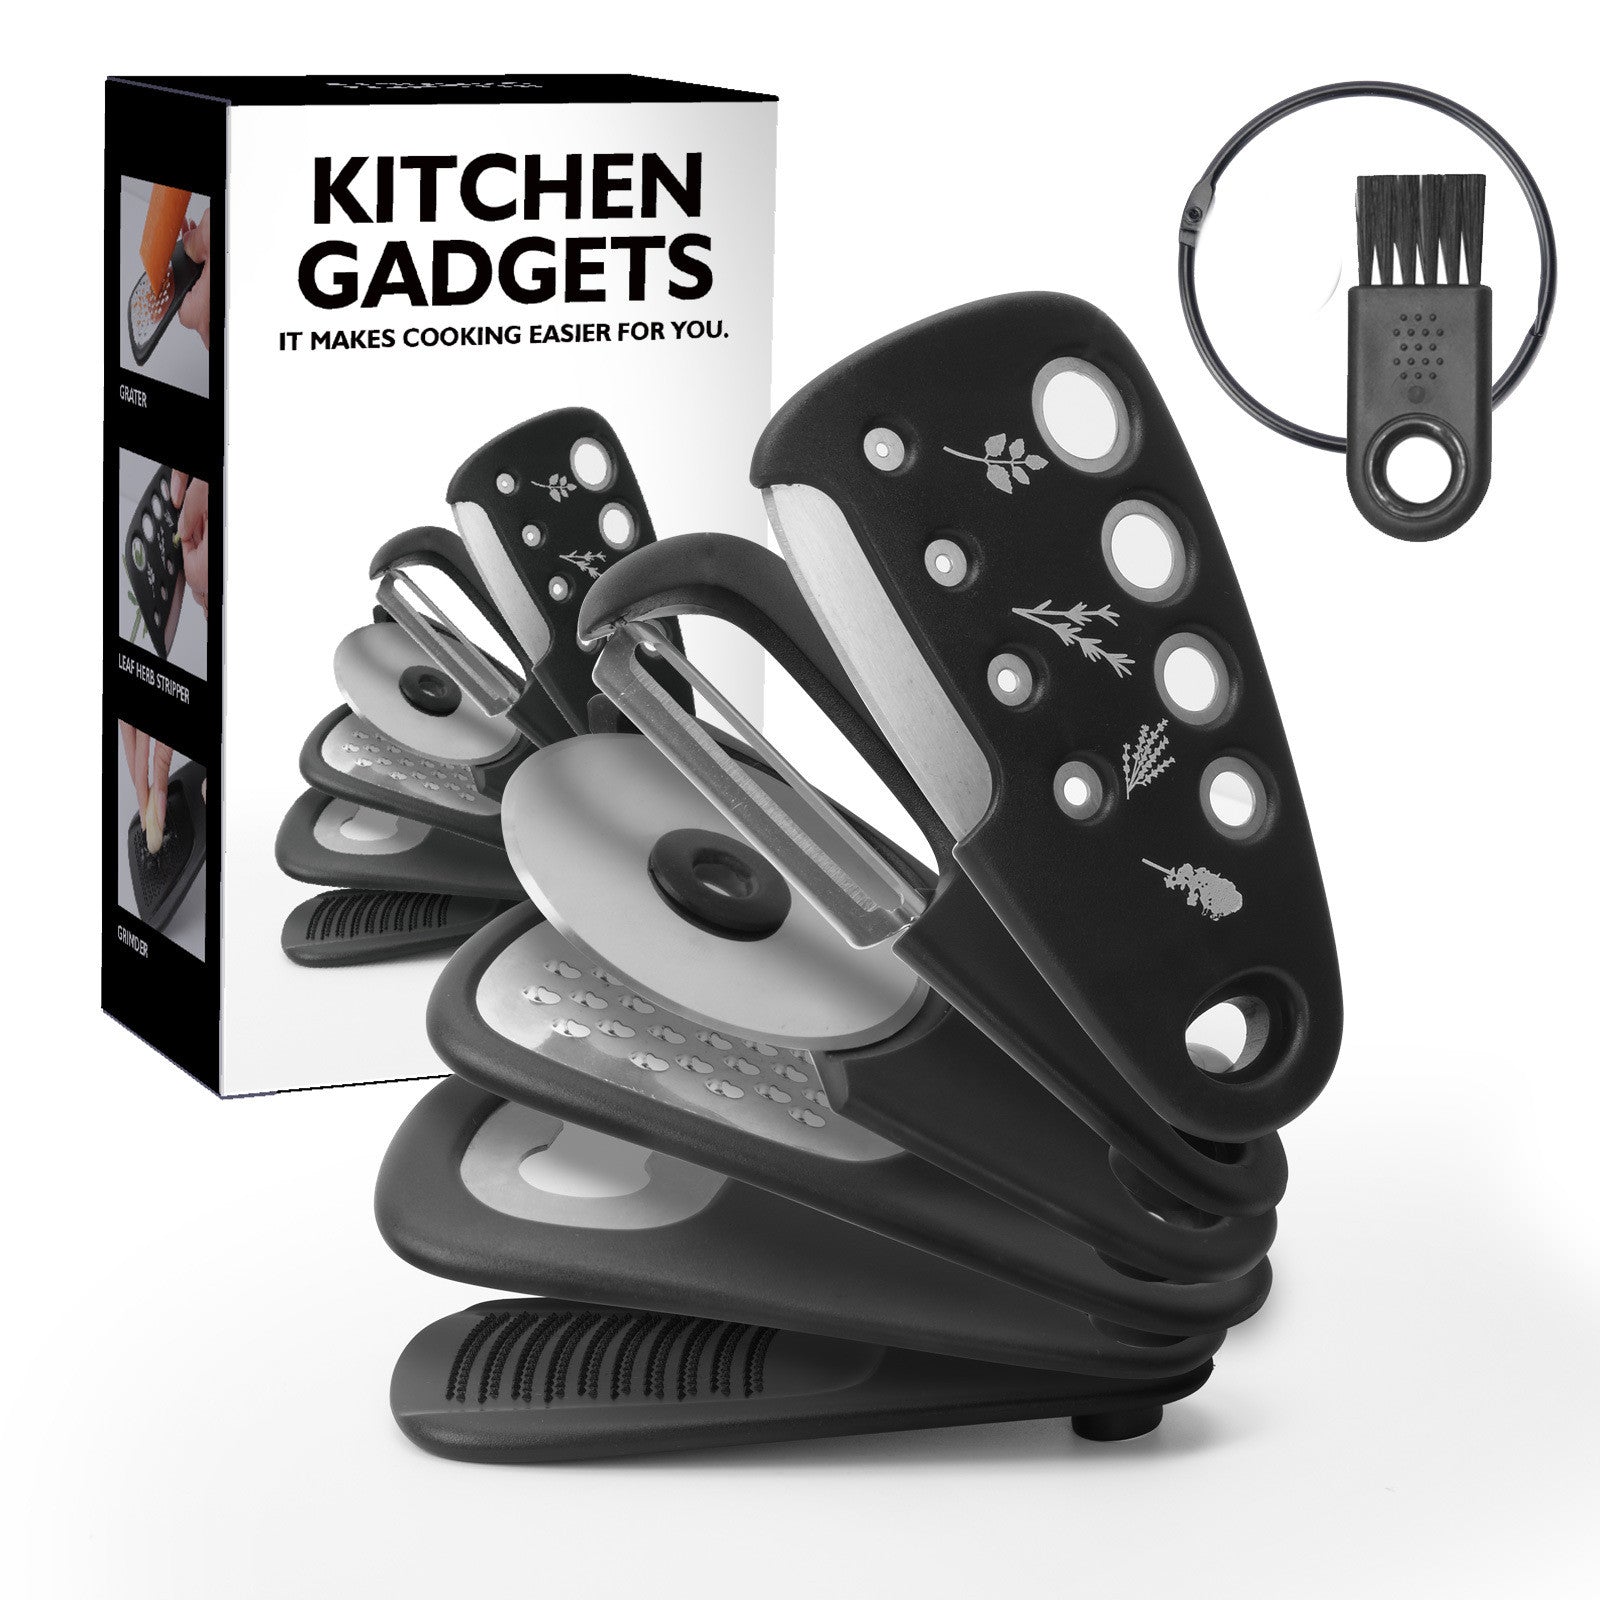 6 Items Kitchen Gadgets Can Be Stacked